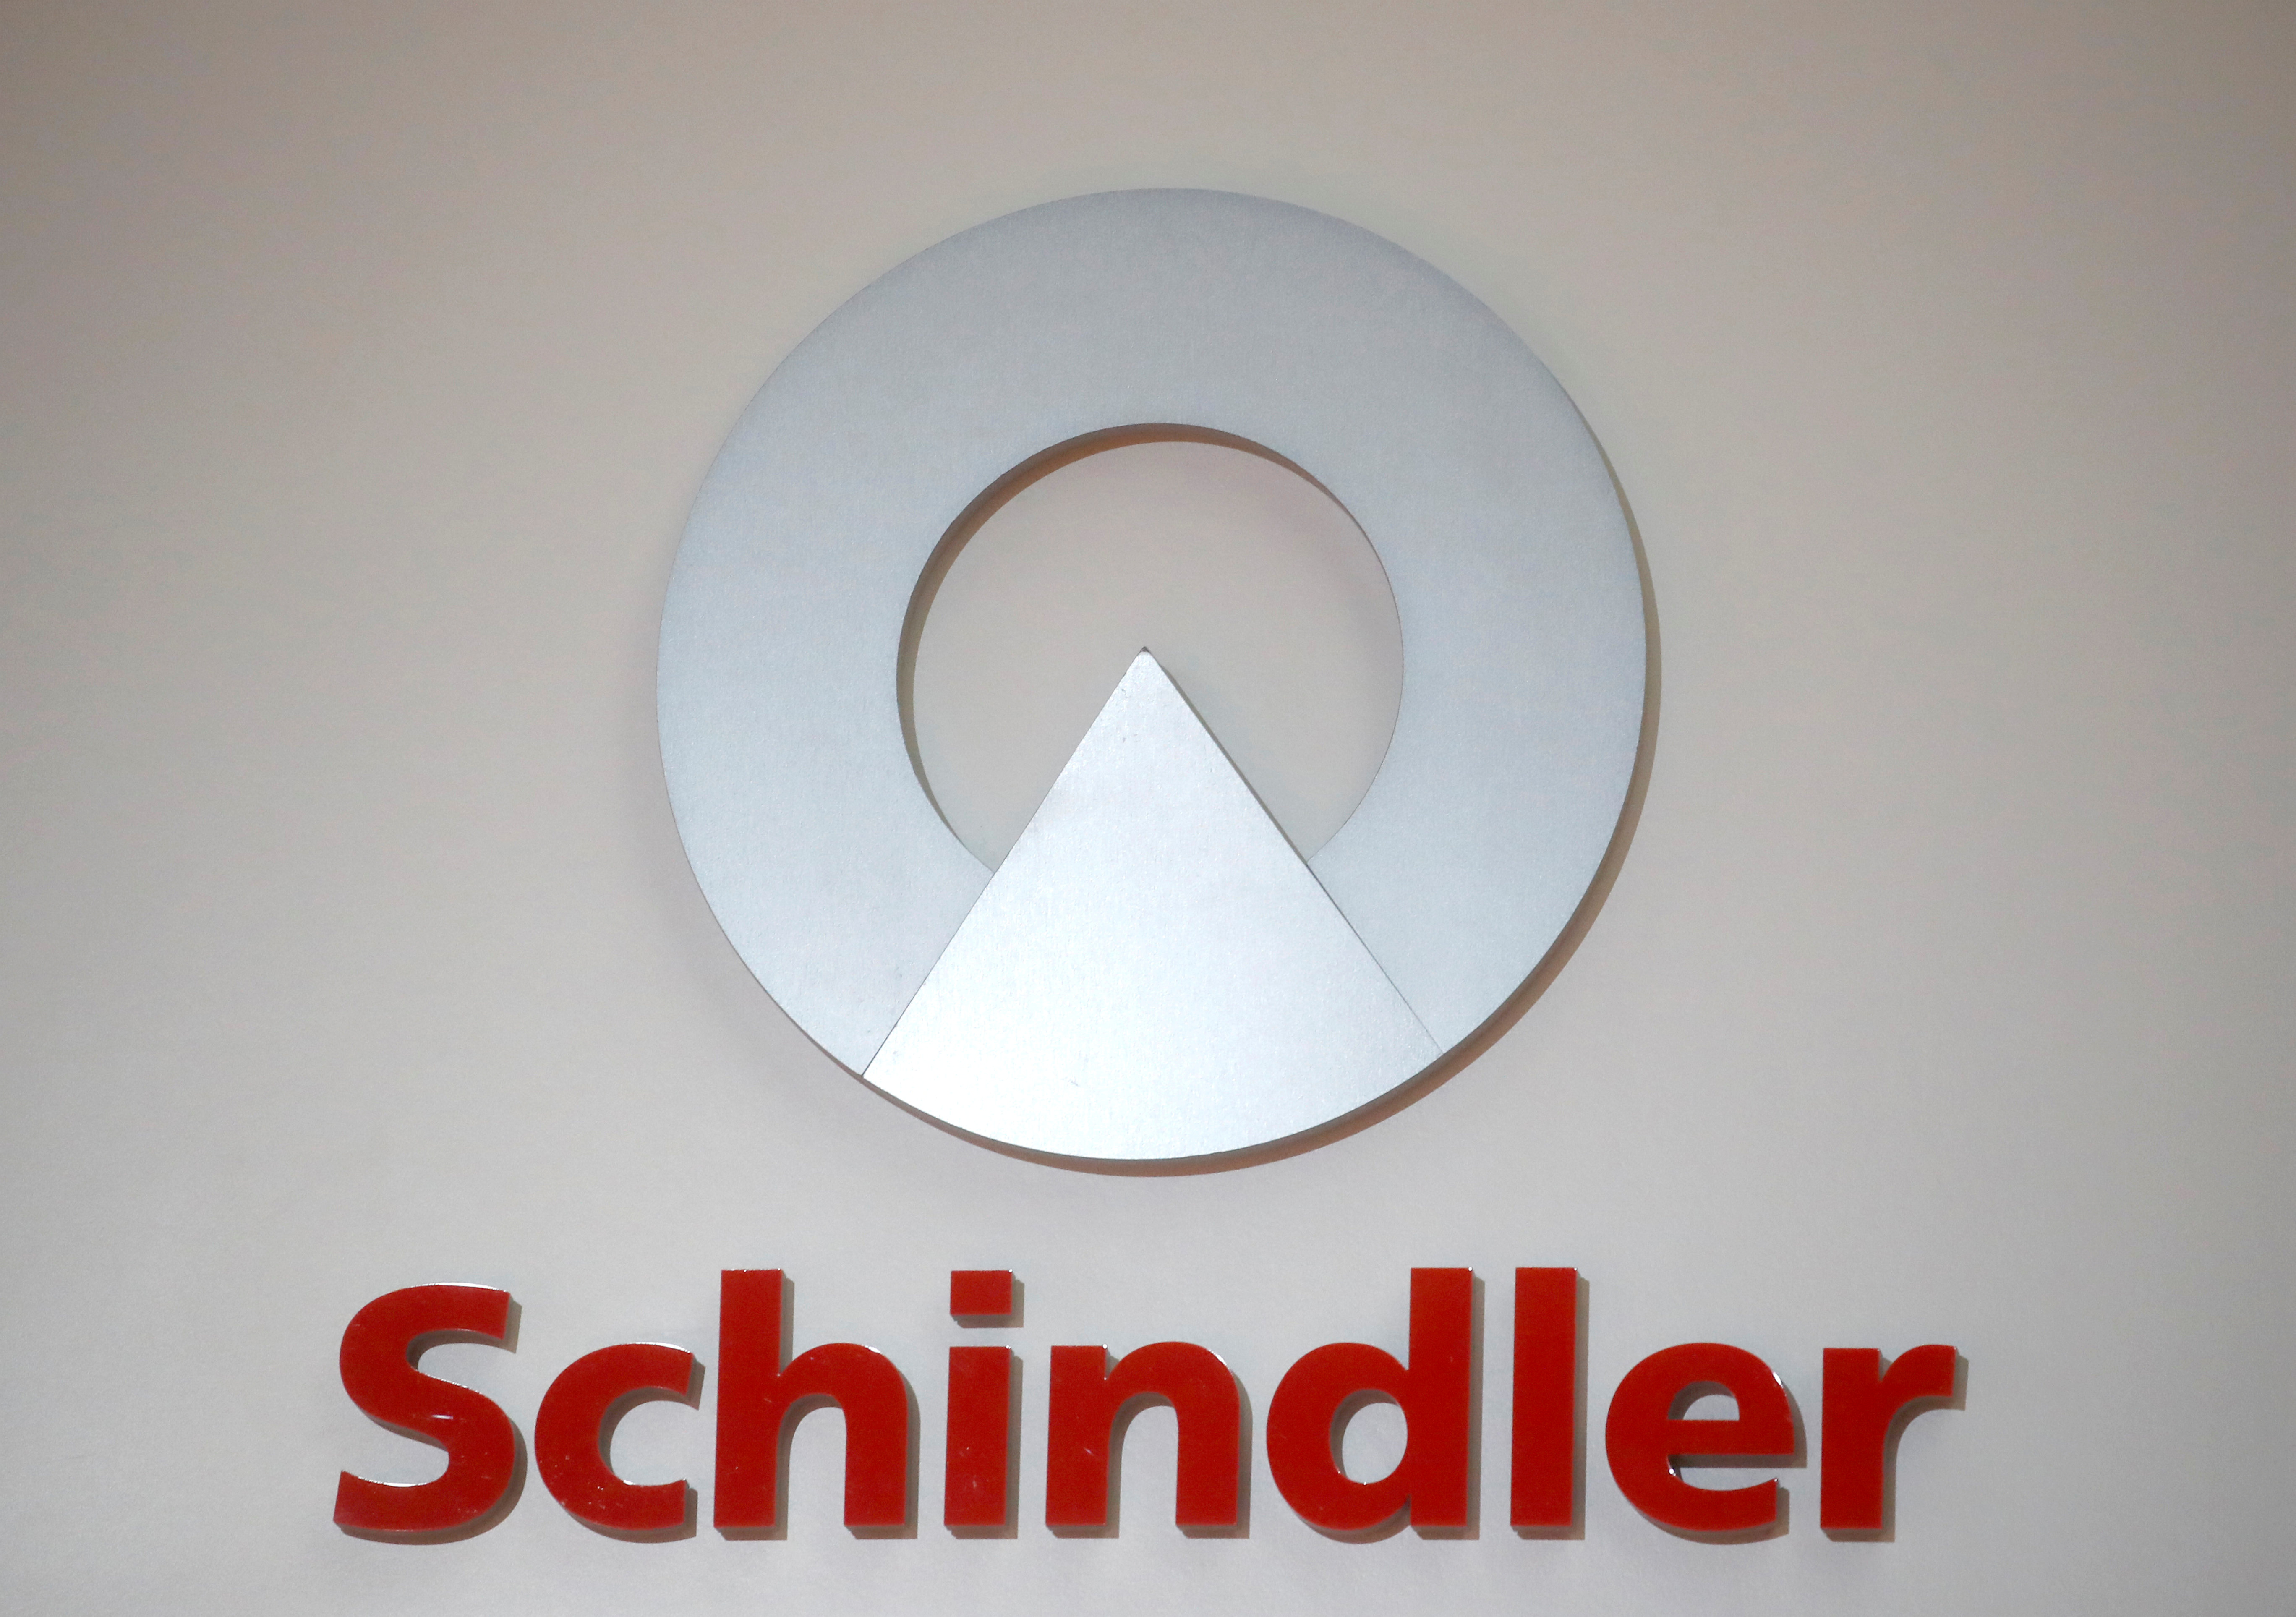 The logo of Swiss elevator maker Schindler is seen during the annual news conference in Zurich, Switzerland February 14, 2020. REUTERS/Arnd Wiegmann/File Photo